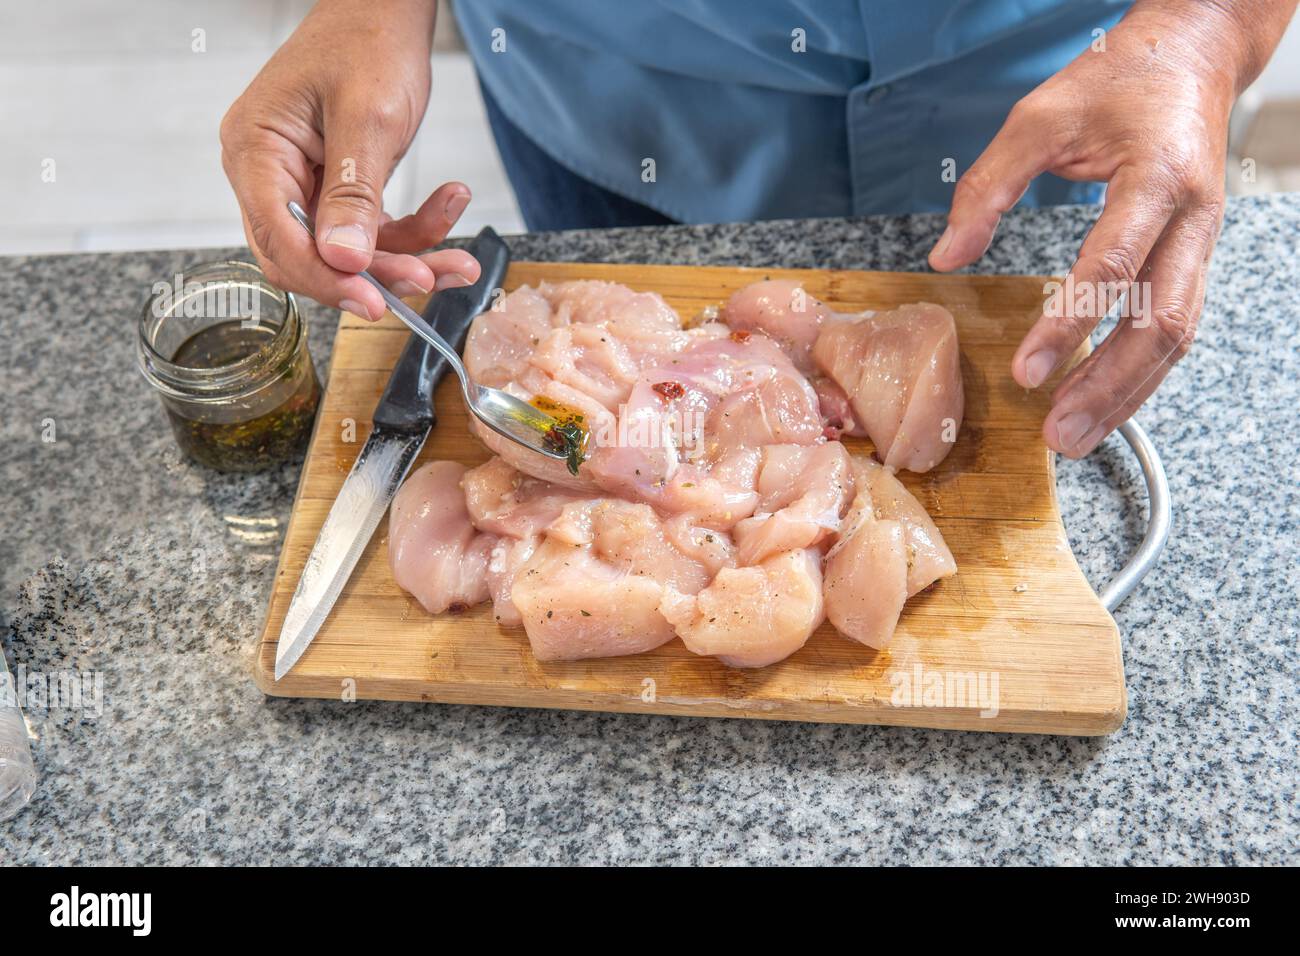 man's hands putting seasoning on a raw chicken to cook it on a cutting board Stock Photo